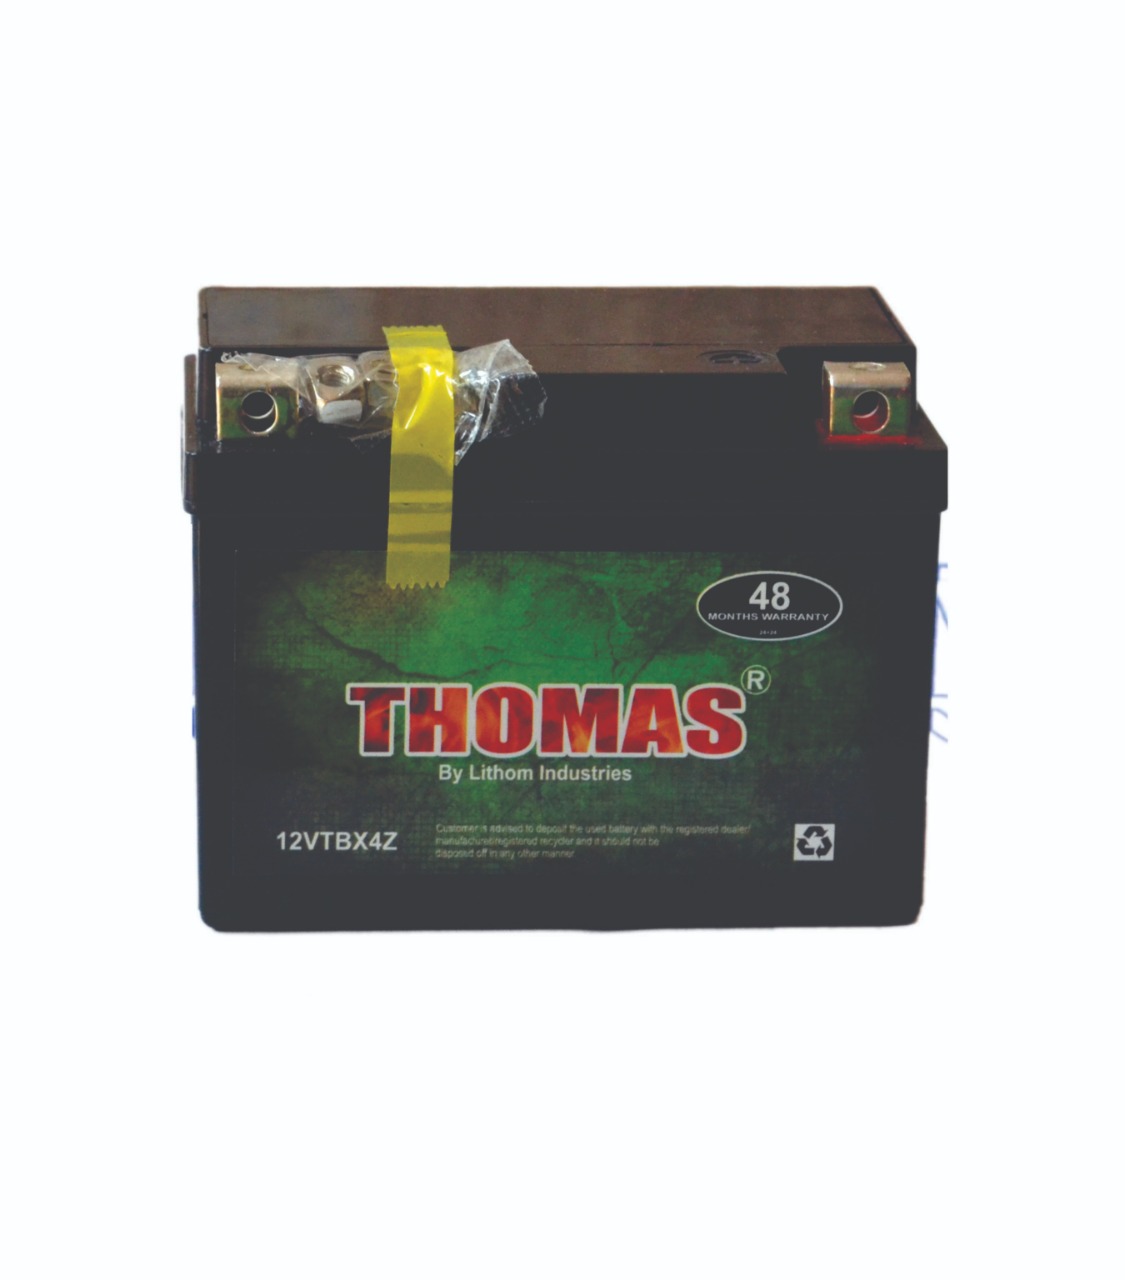 THOMAS Two Wheeler 4LB Battery (Suitable for Bikes and Scooter) 